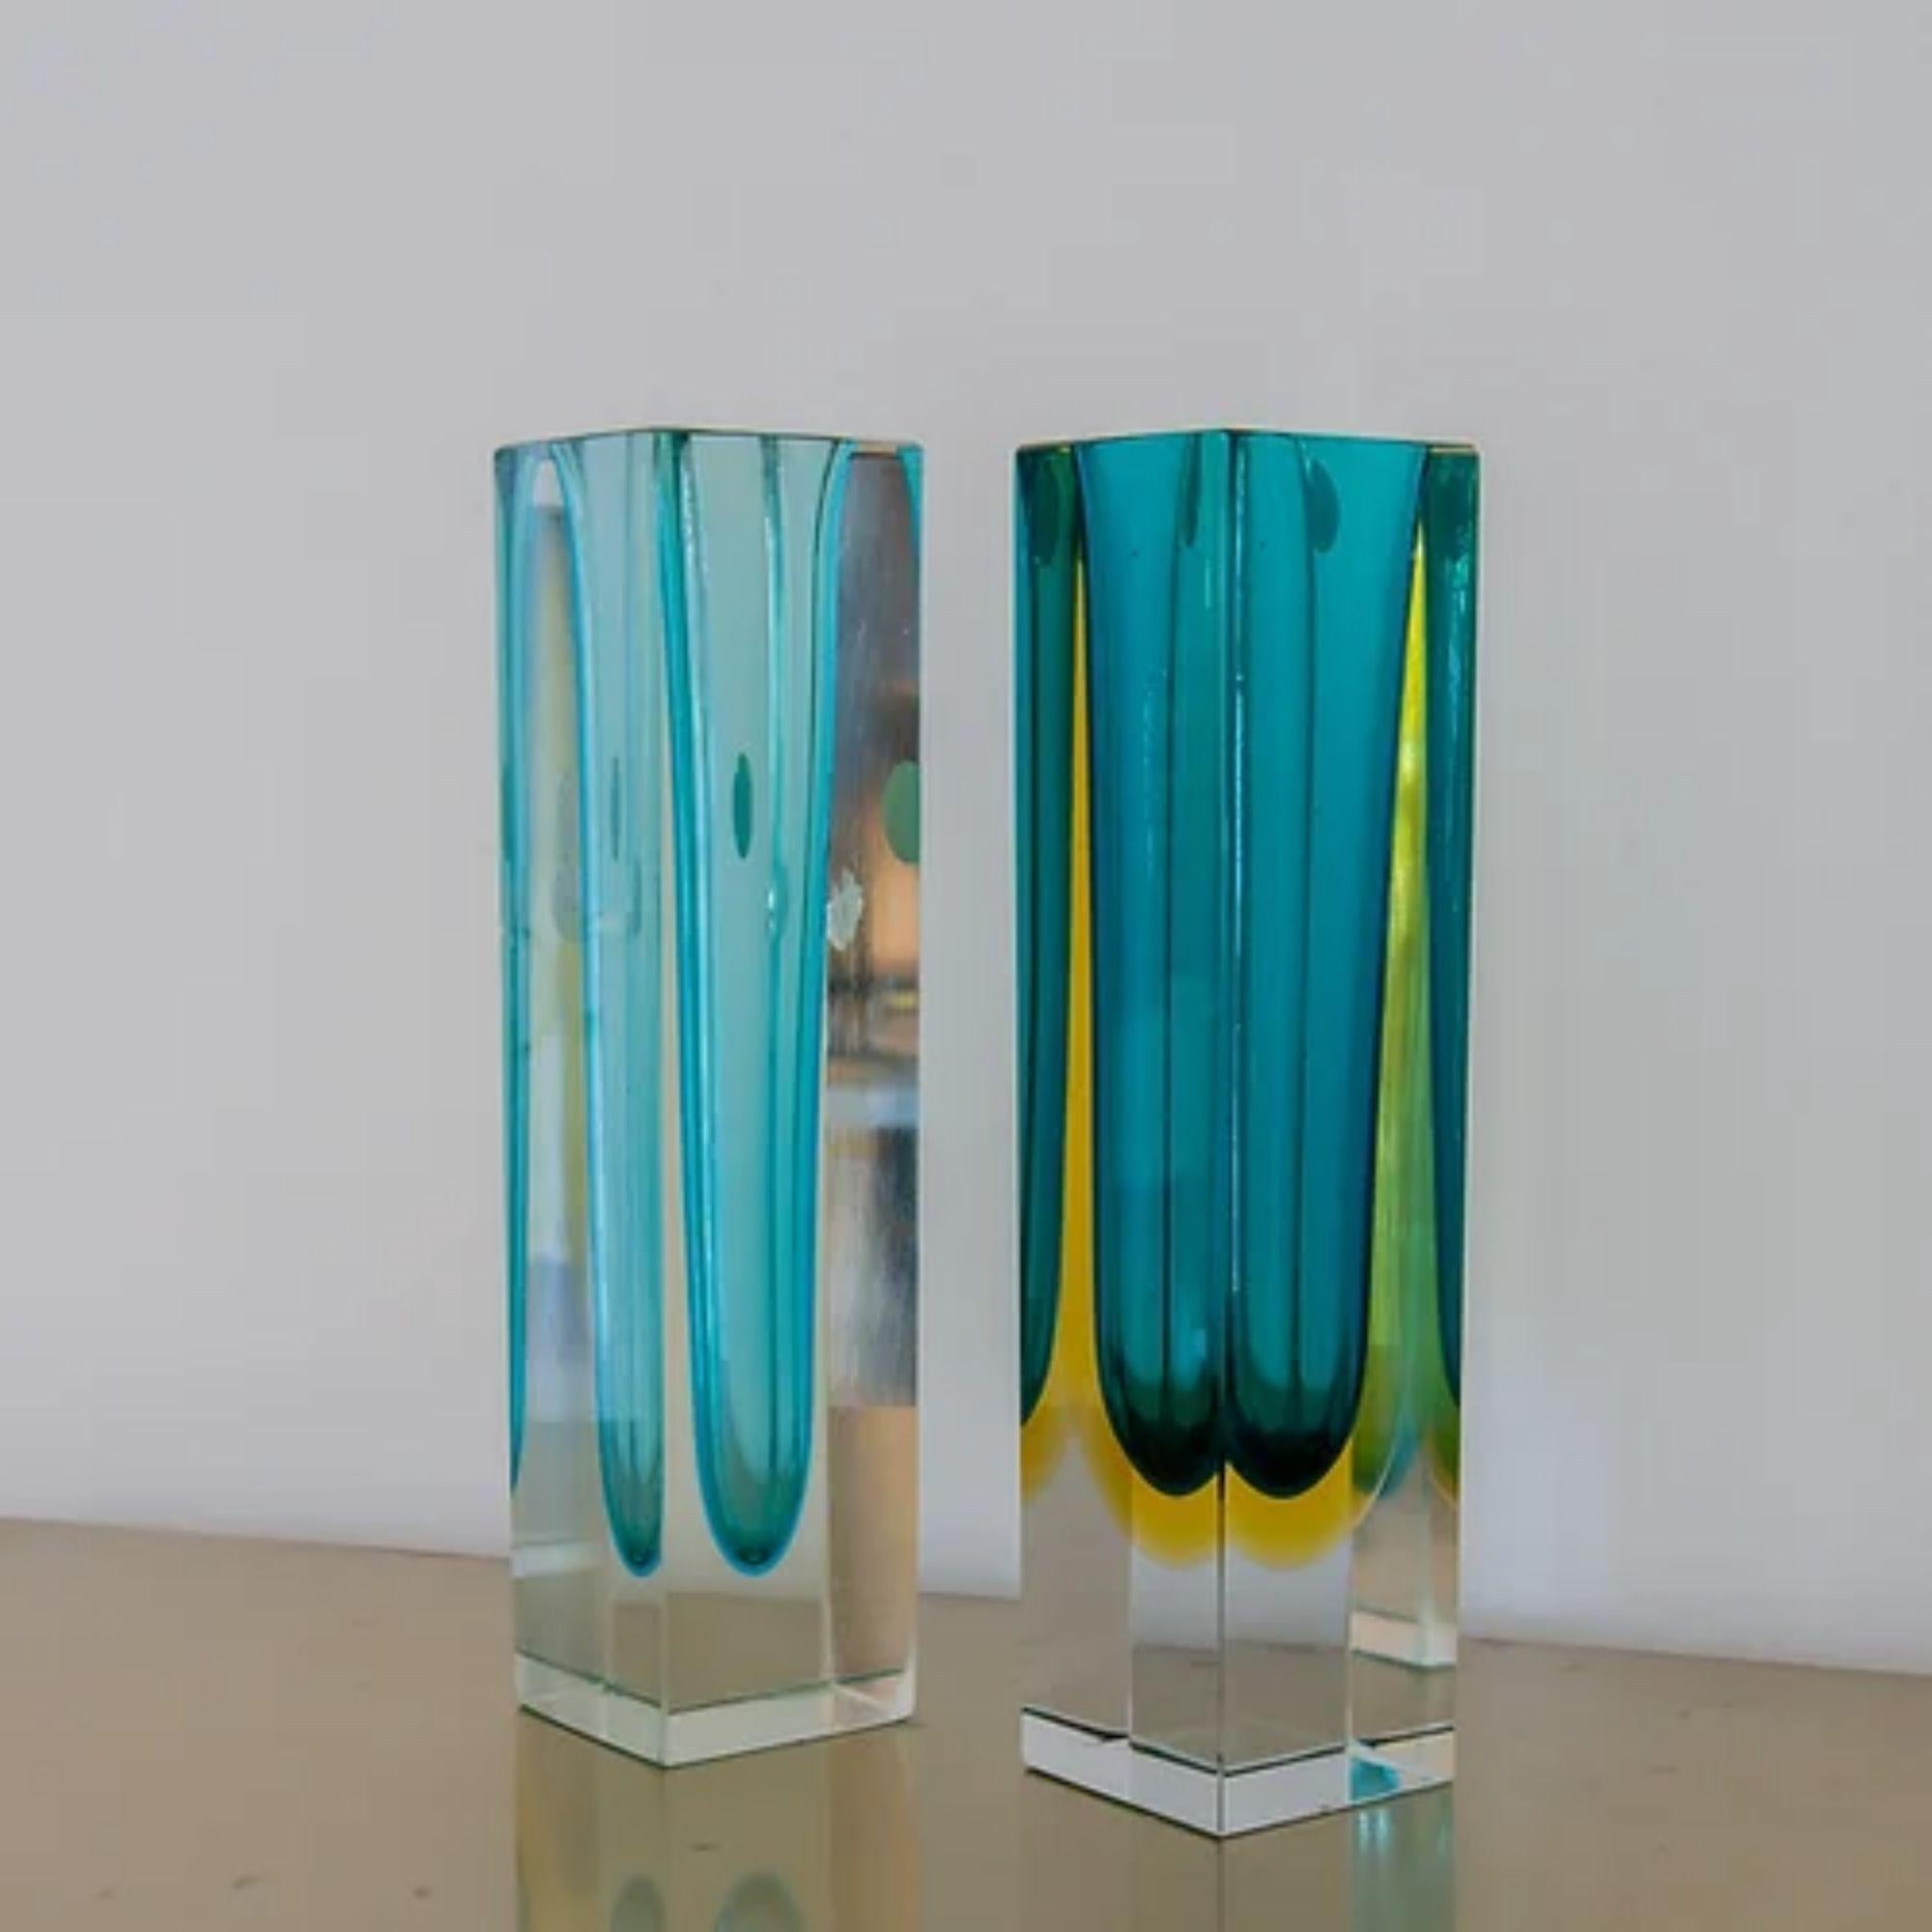 A match pair of turquoise Murano glass vases comprising of: 

A Large Murano Sommerso Glass Vase with a Turquoise Centre Cased in Clear Glass
30cms high x 7cms square

A Large Murano Sommerso Glass Vase with a Turquoise and Amber Centre Cased in